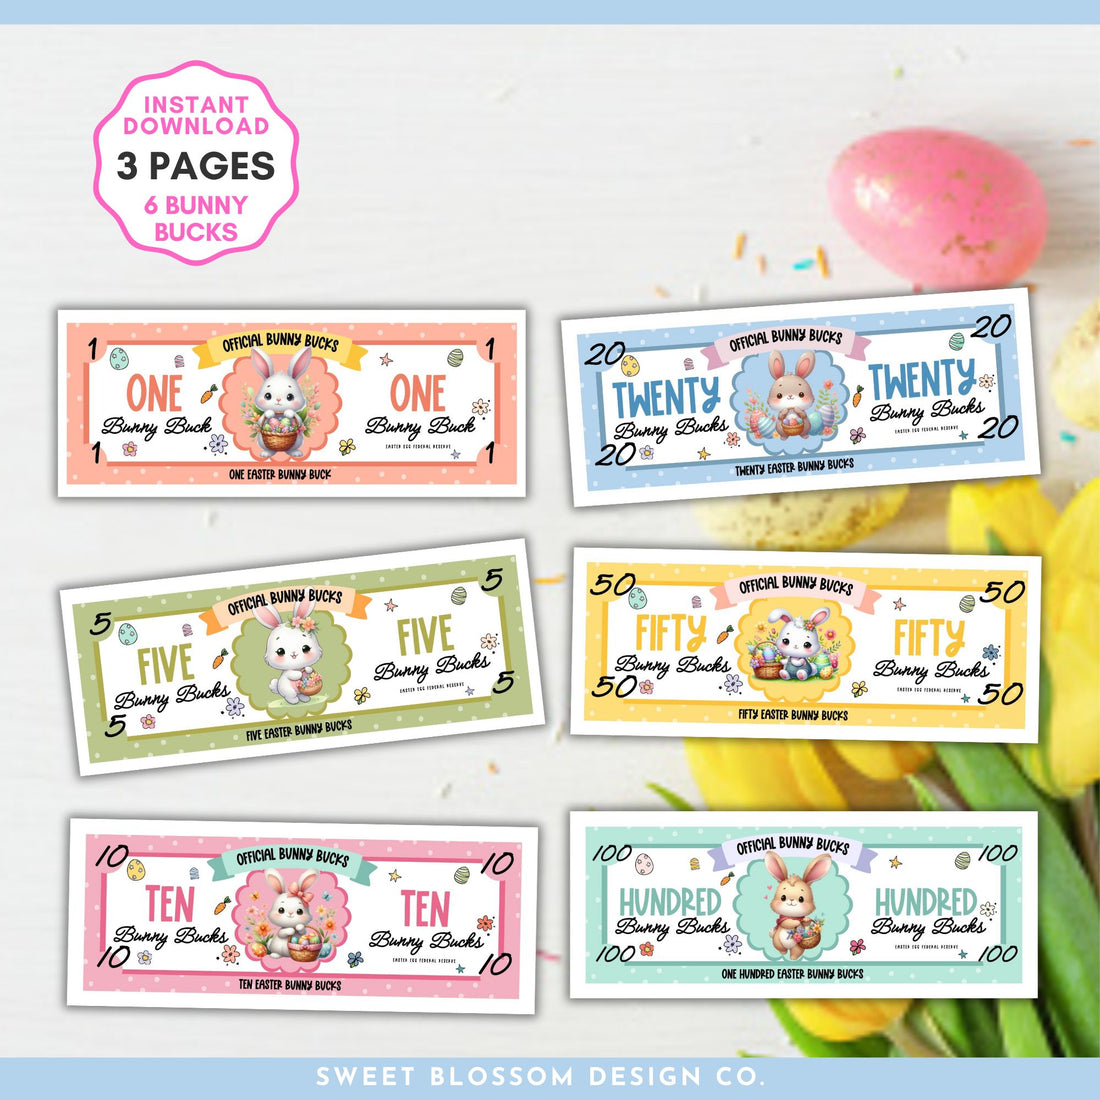 Welcome to our Easter Bunny Bucks Reward System – the perfect way to add extra fun and excitement to your Easter celebrations! Our printable reward system includes six adorable Bunny Bucks designs, each guaranteed to bring smiles to your little ones&